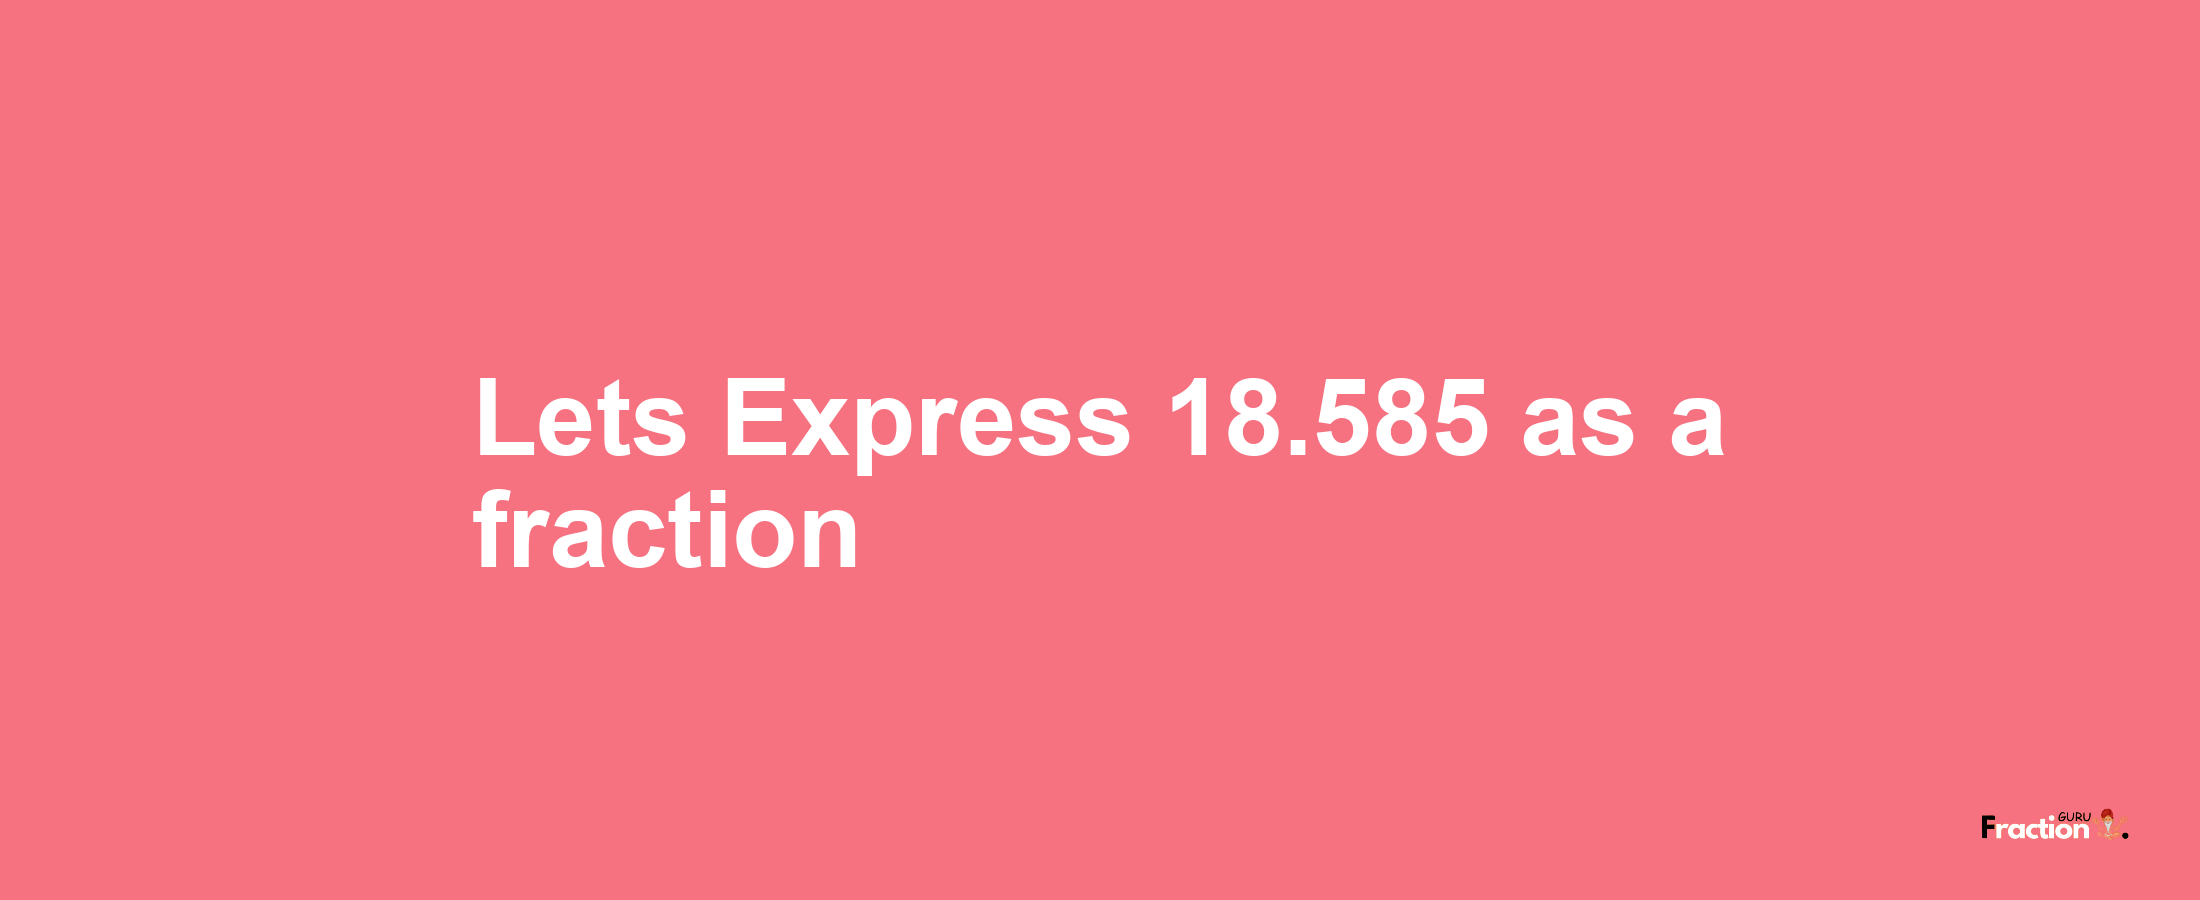 Lets Express 18.585 as afraction